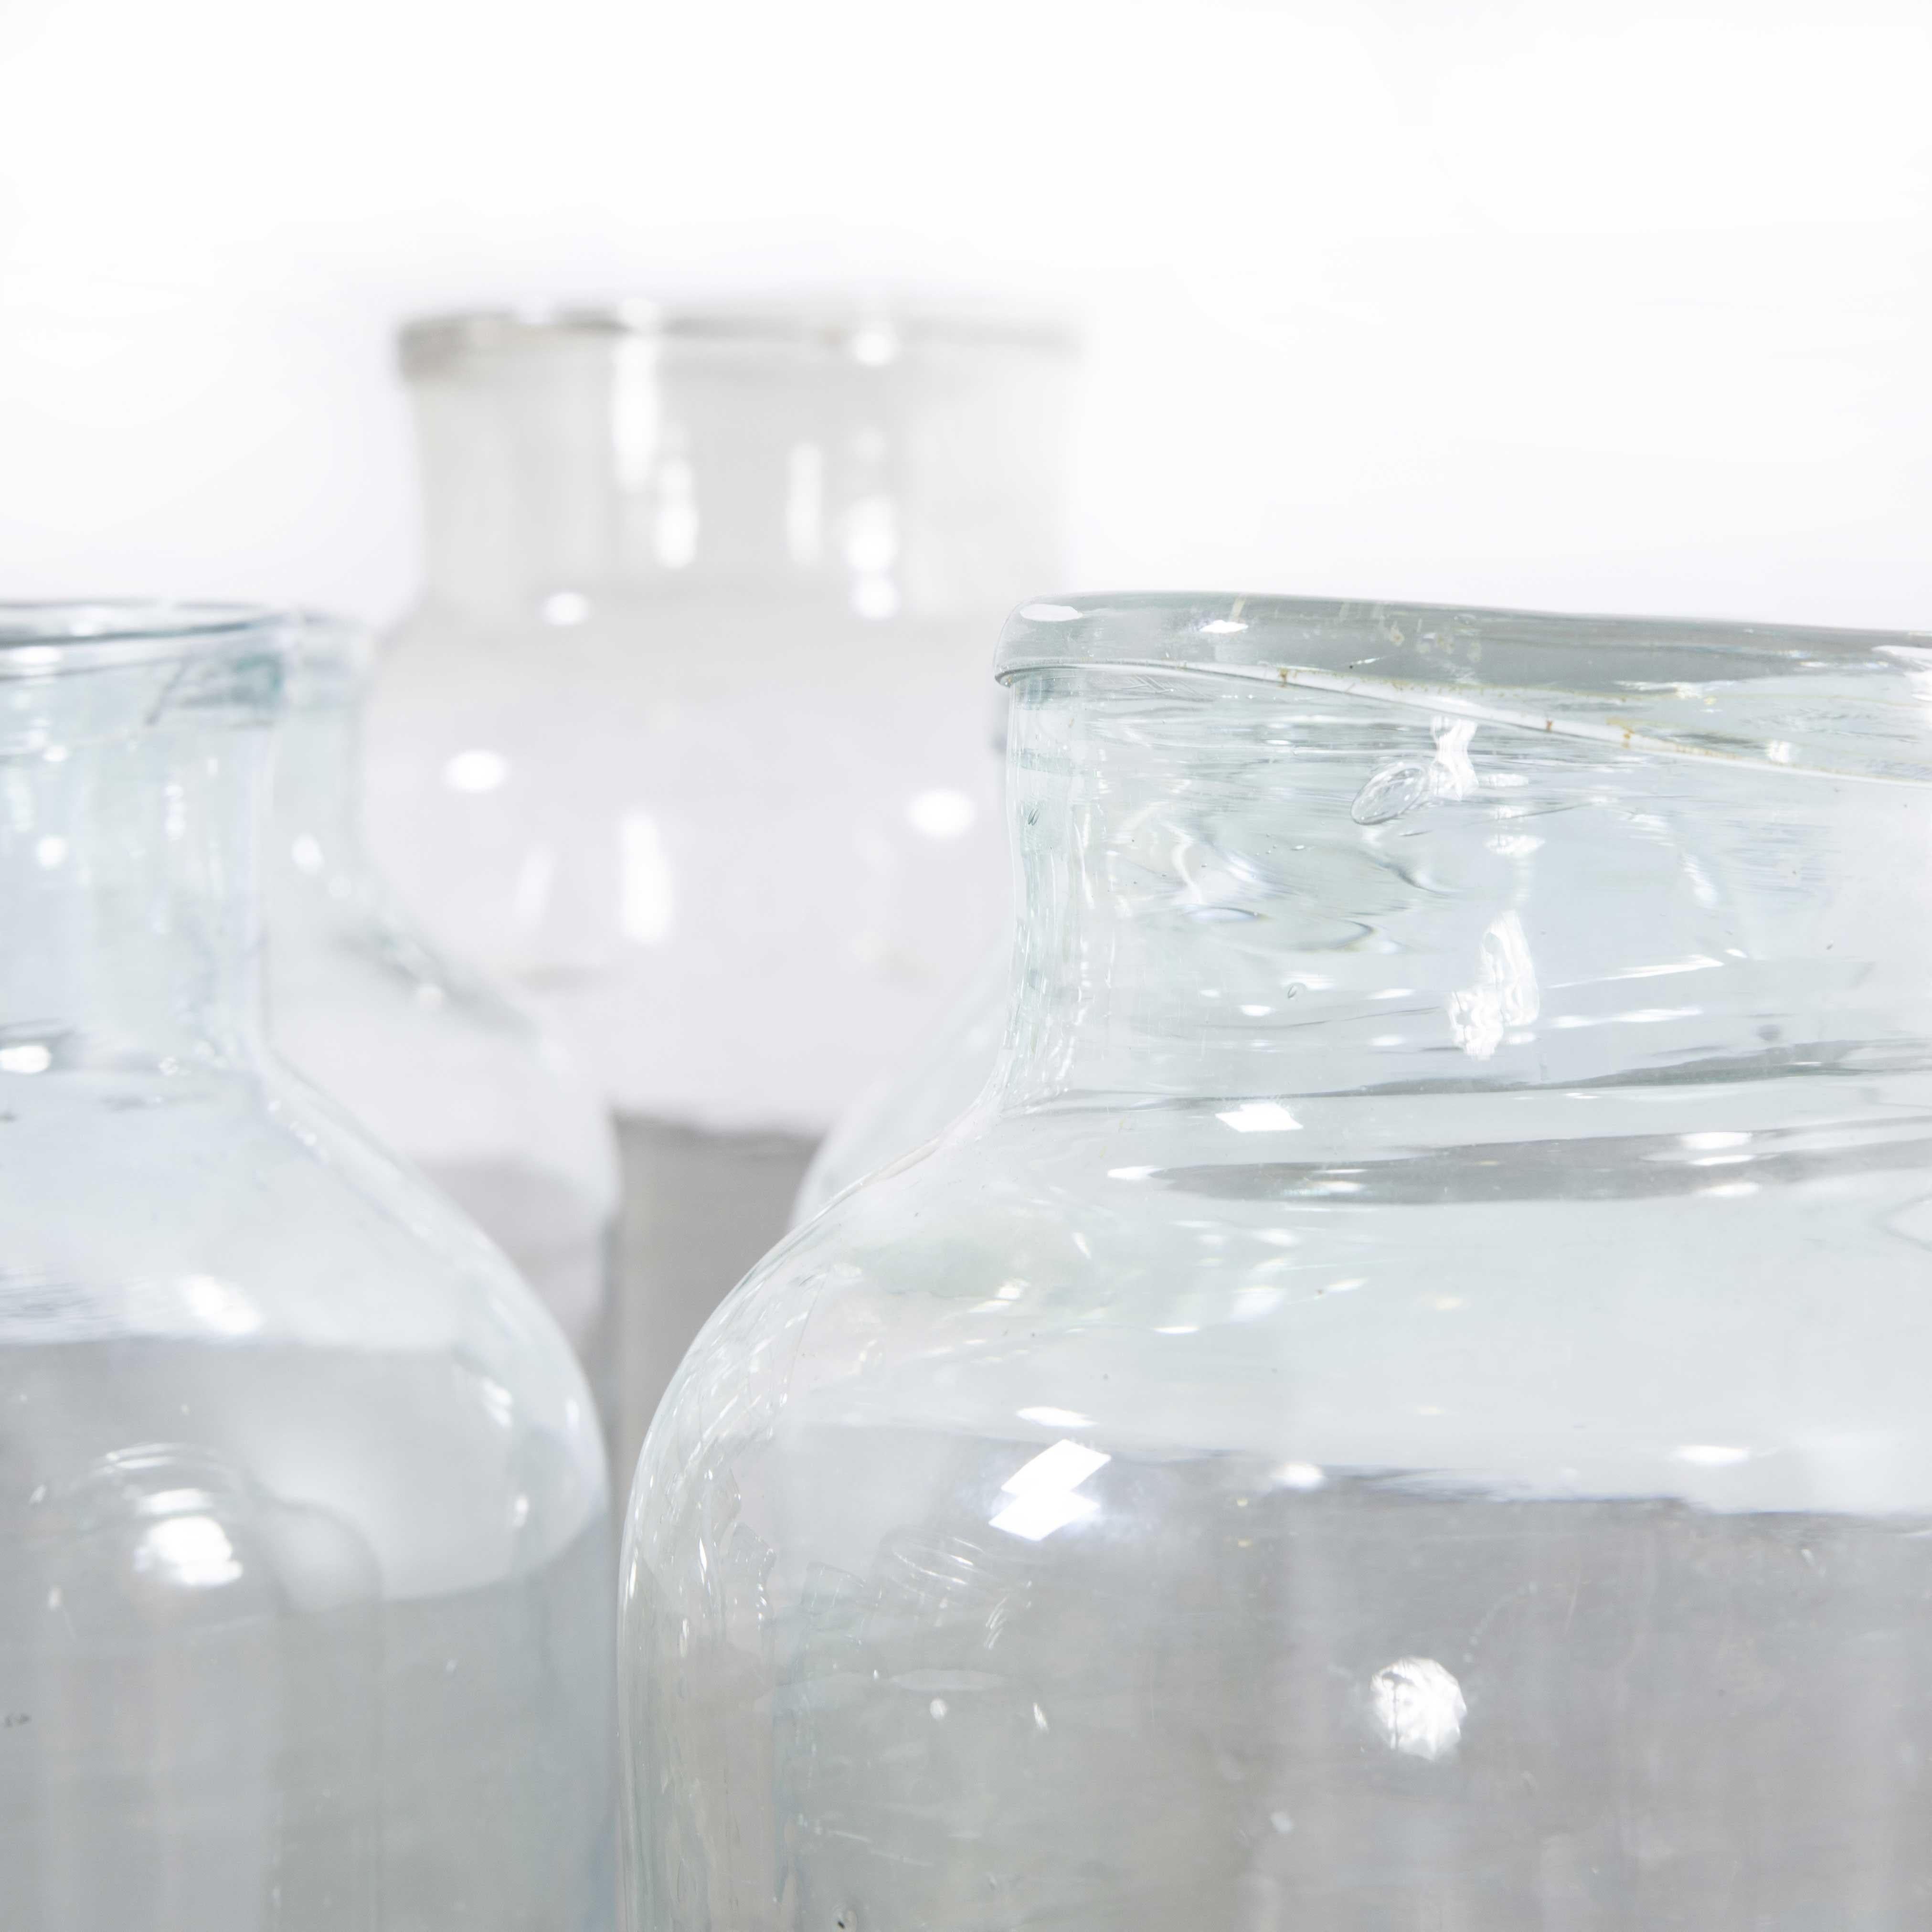 1940’s Mouthblown Hungarian Storage Jars – Extra Large
1940’s Mouthblown Hungarian Storage Jars – Extra Large. Traditional handmade storage jars made in small workshops in Hungary these are beautiful vintage storage jars, mouthblown locally. The top